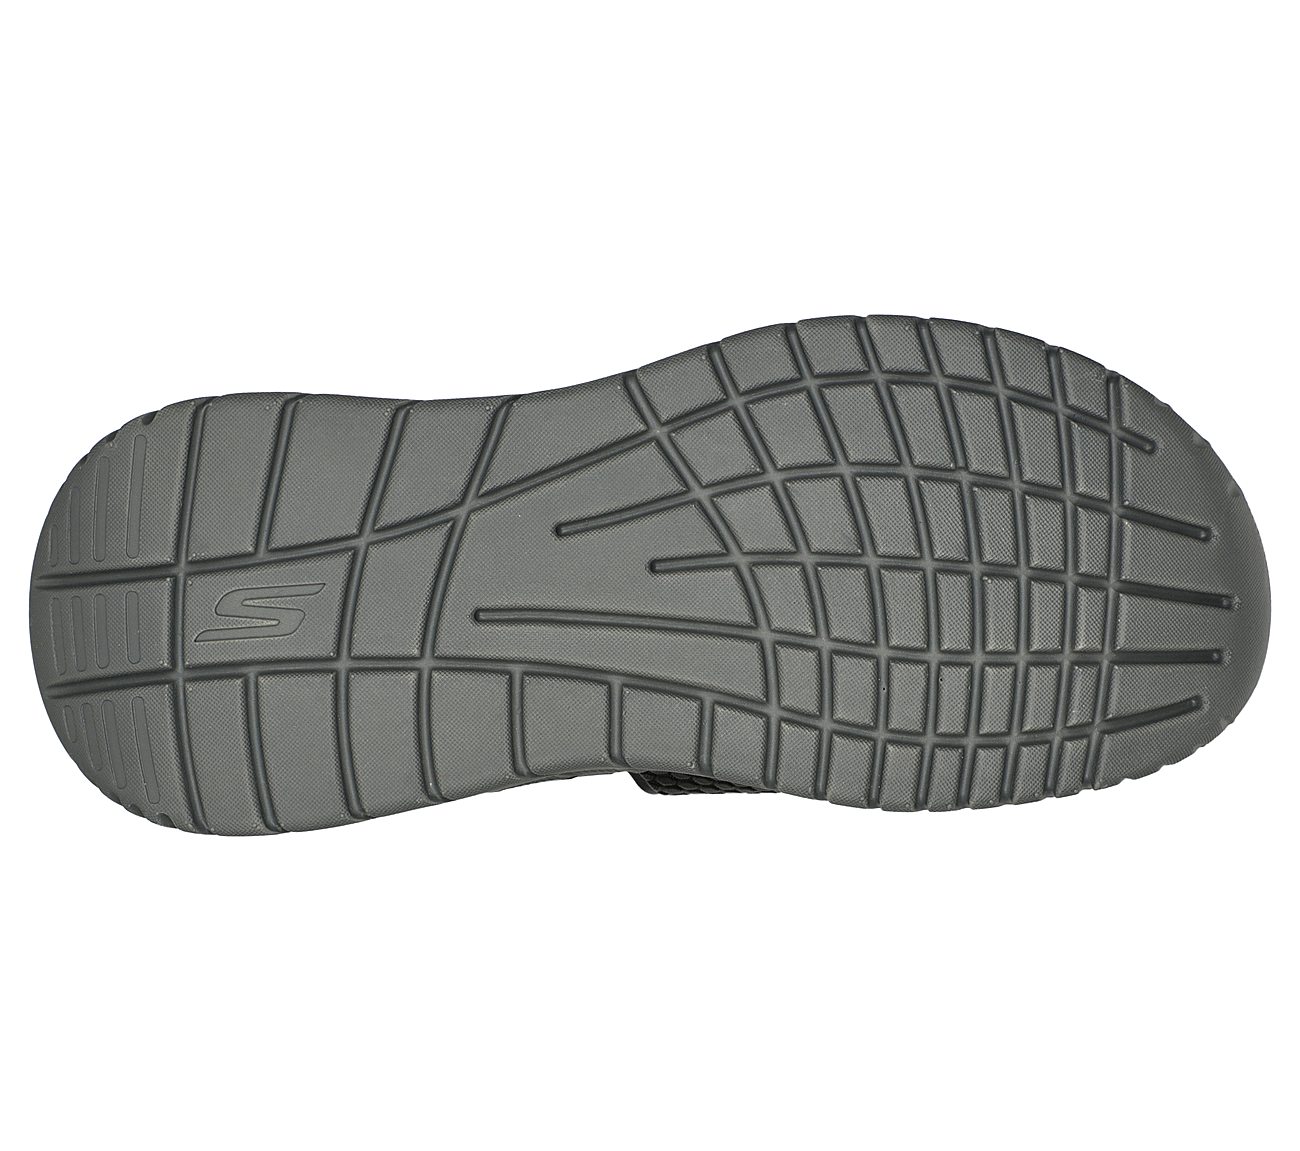 GO RECOVER SANDAL, BLACK/CHARCOAL Footwear Bottom View